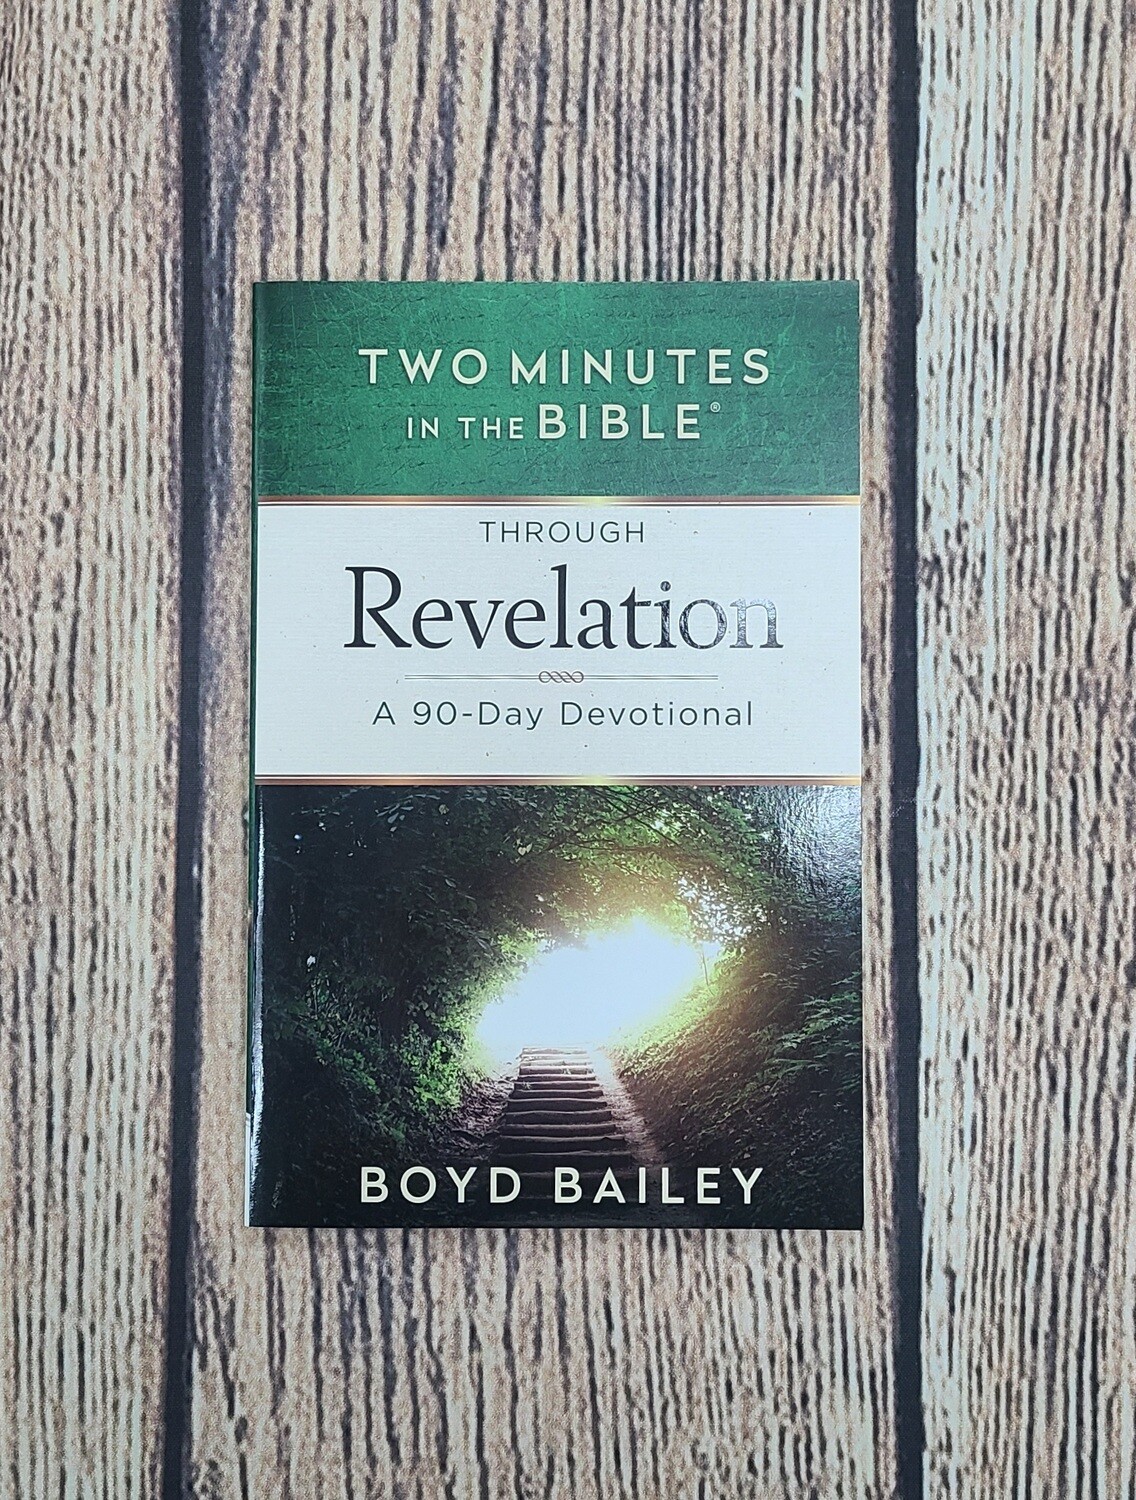 Two Minutes in the Bible Through Revelation: A 90-Day Devotional by Boyd Bailey